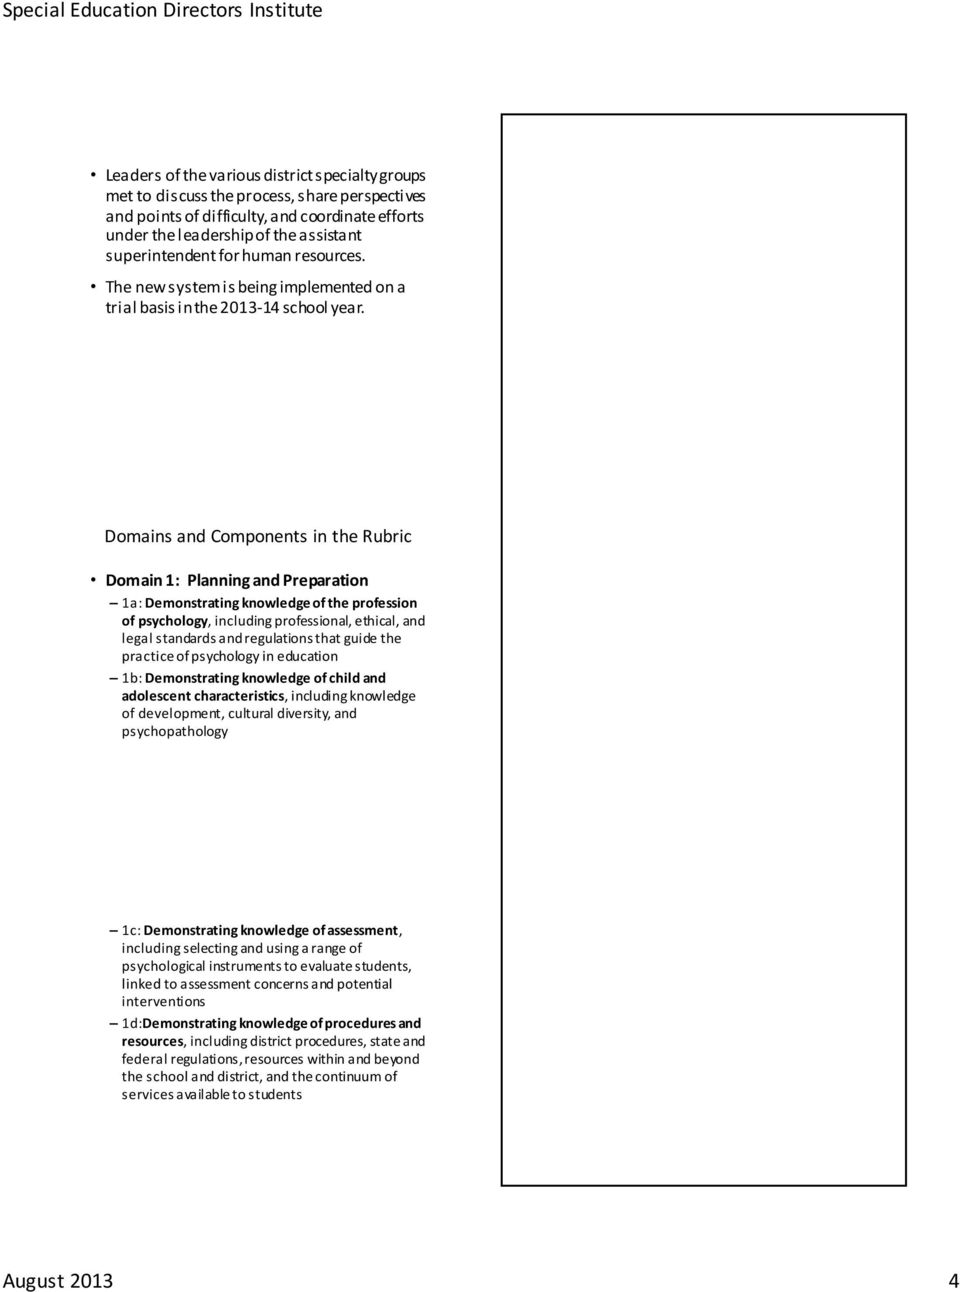 Domains and Components in the Rubric Domain 1: Planning and Preparation 1a: Demonstrating knowledge of the profession of psychology, including professional, ethical, and legal standards and